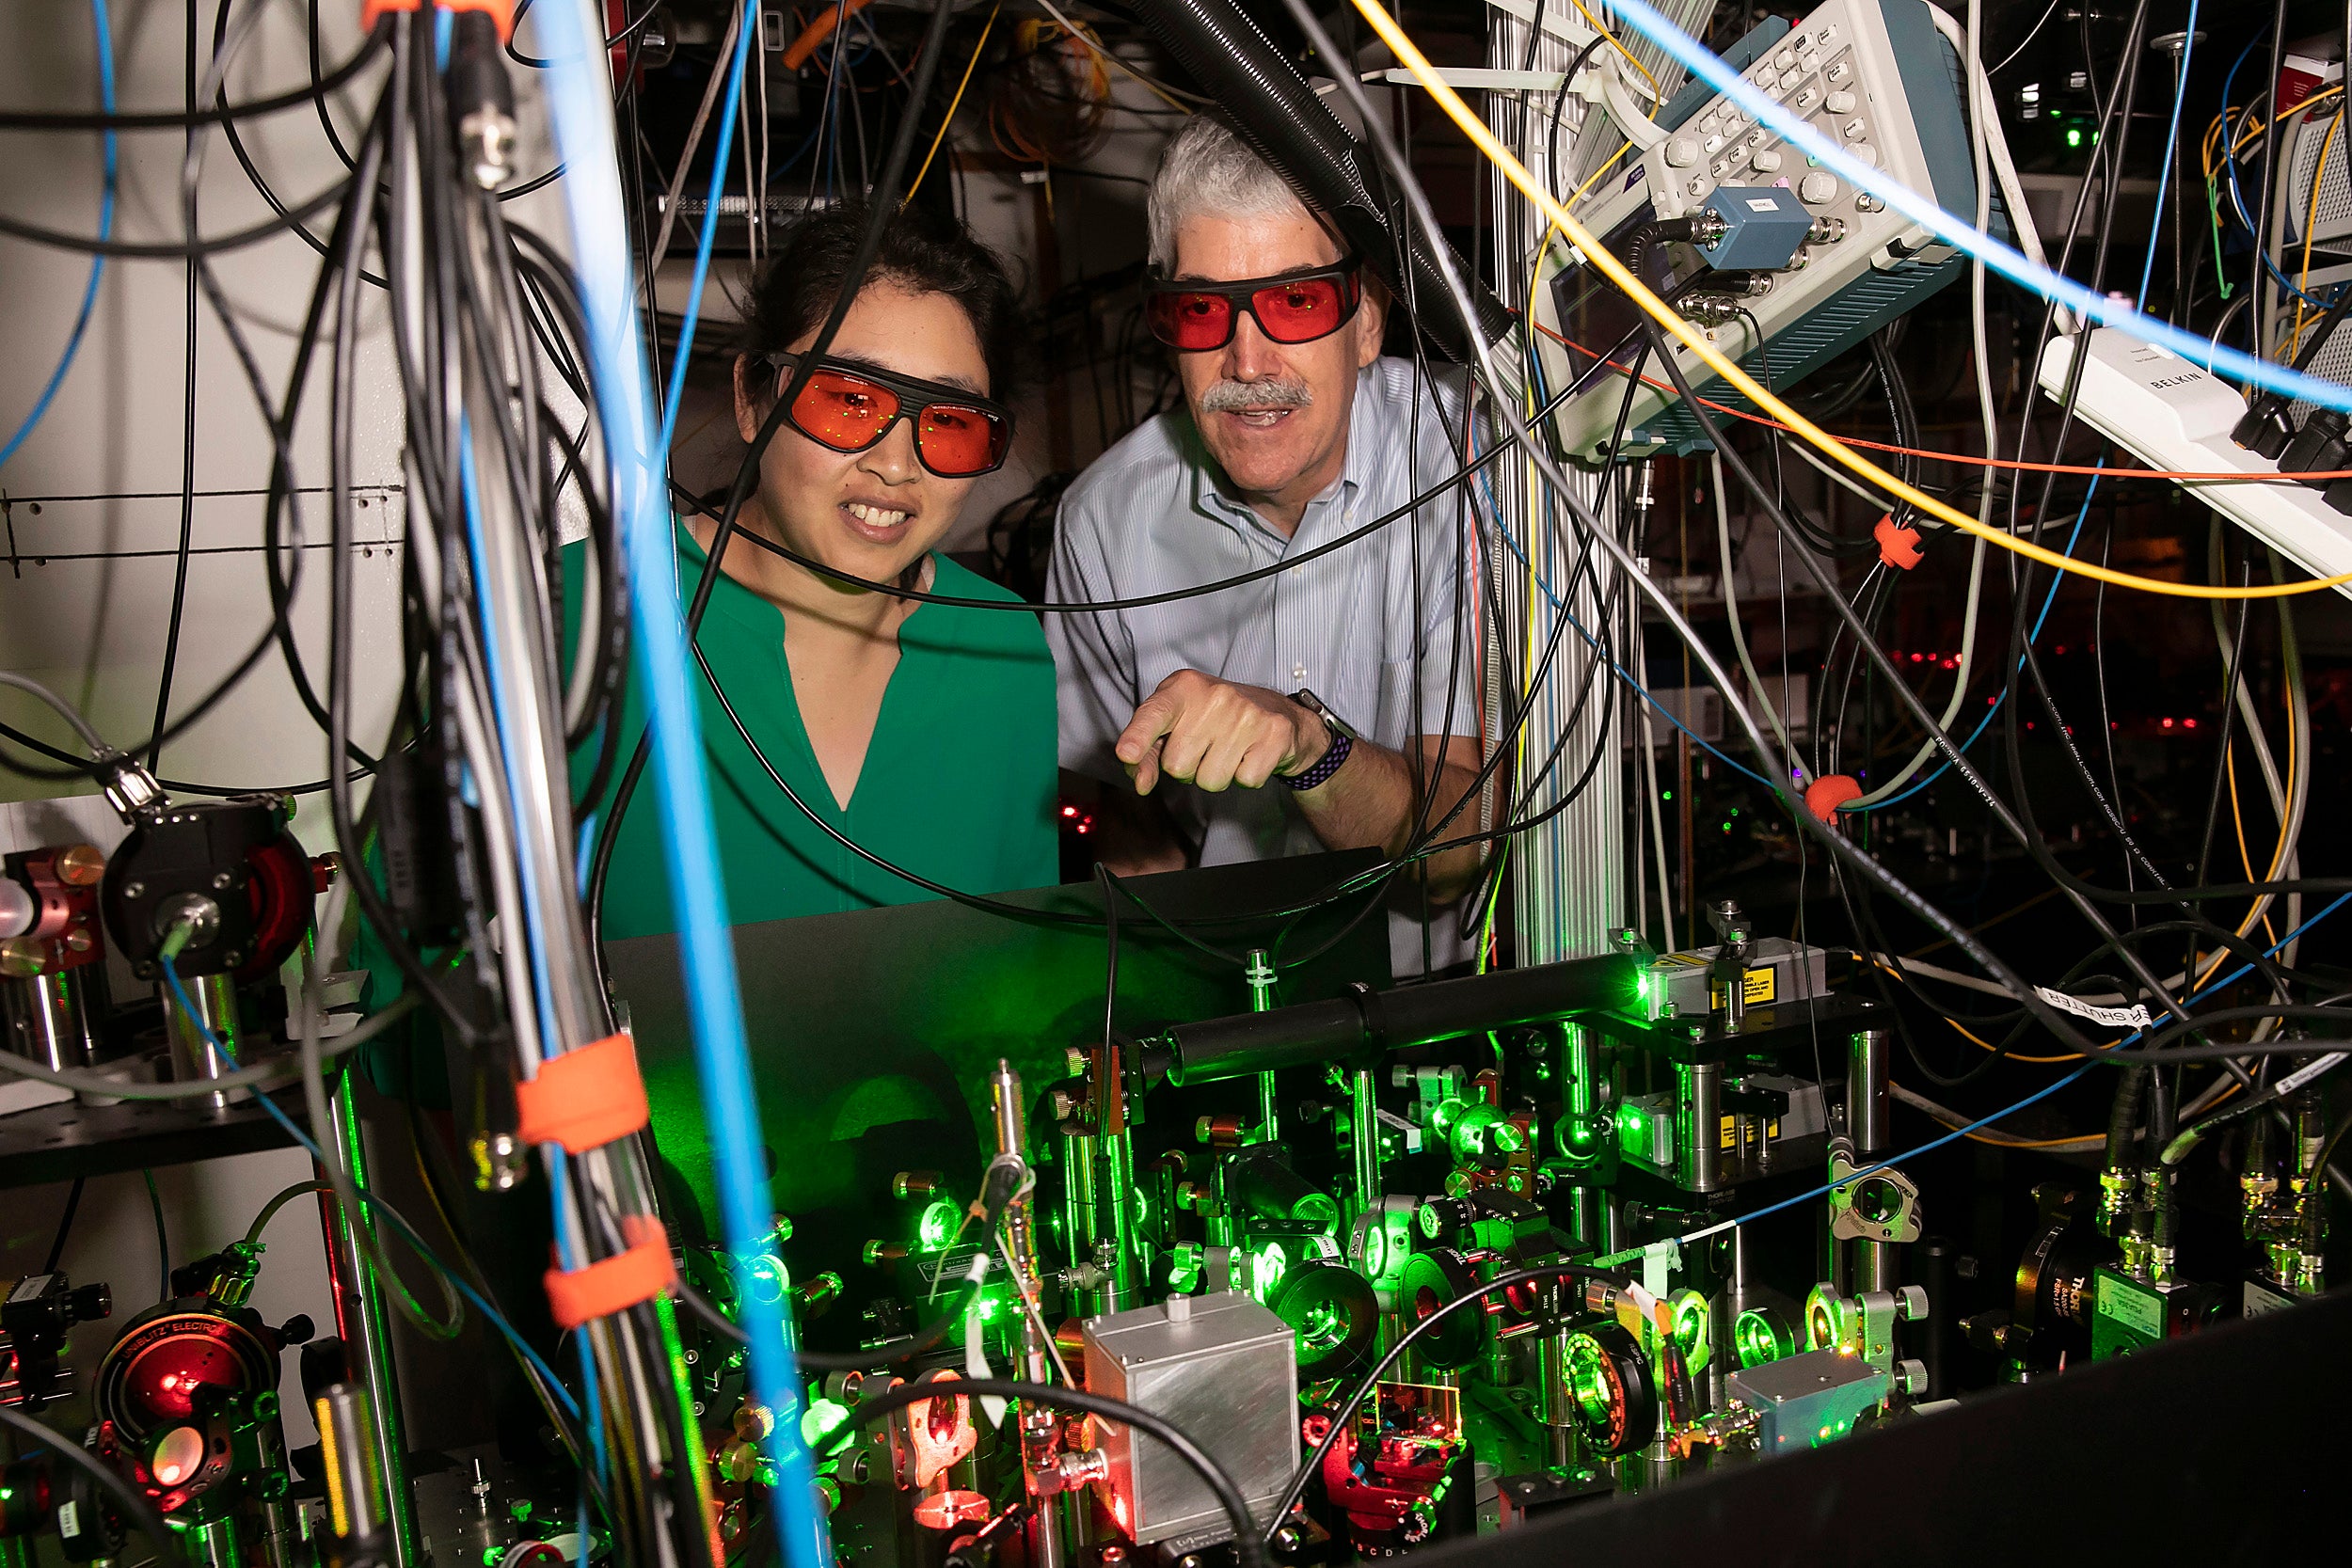 Using precisely focused lasers that act as optical tweezers